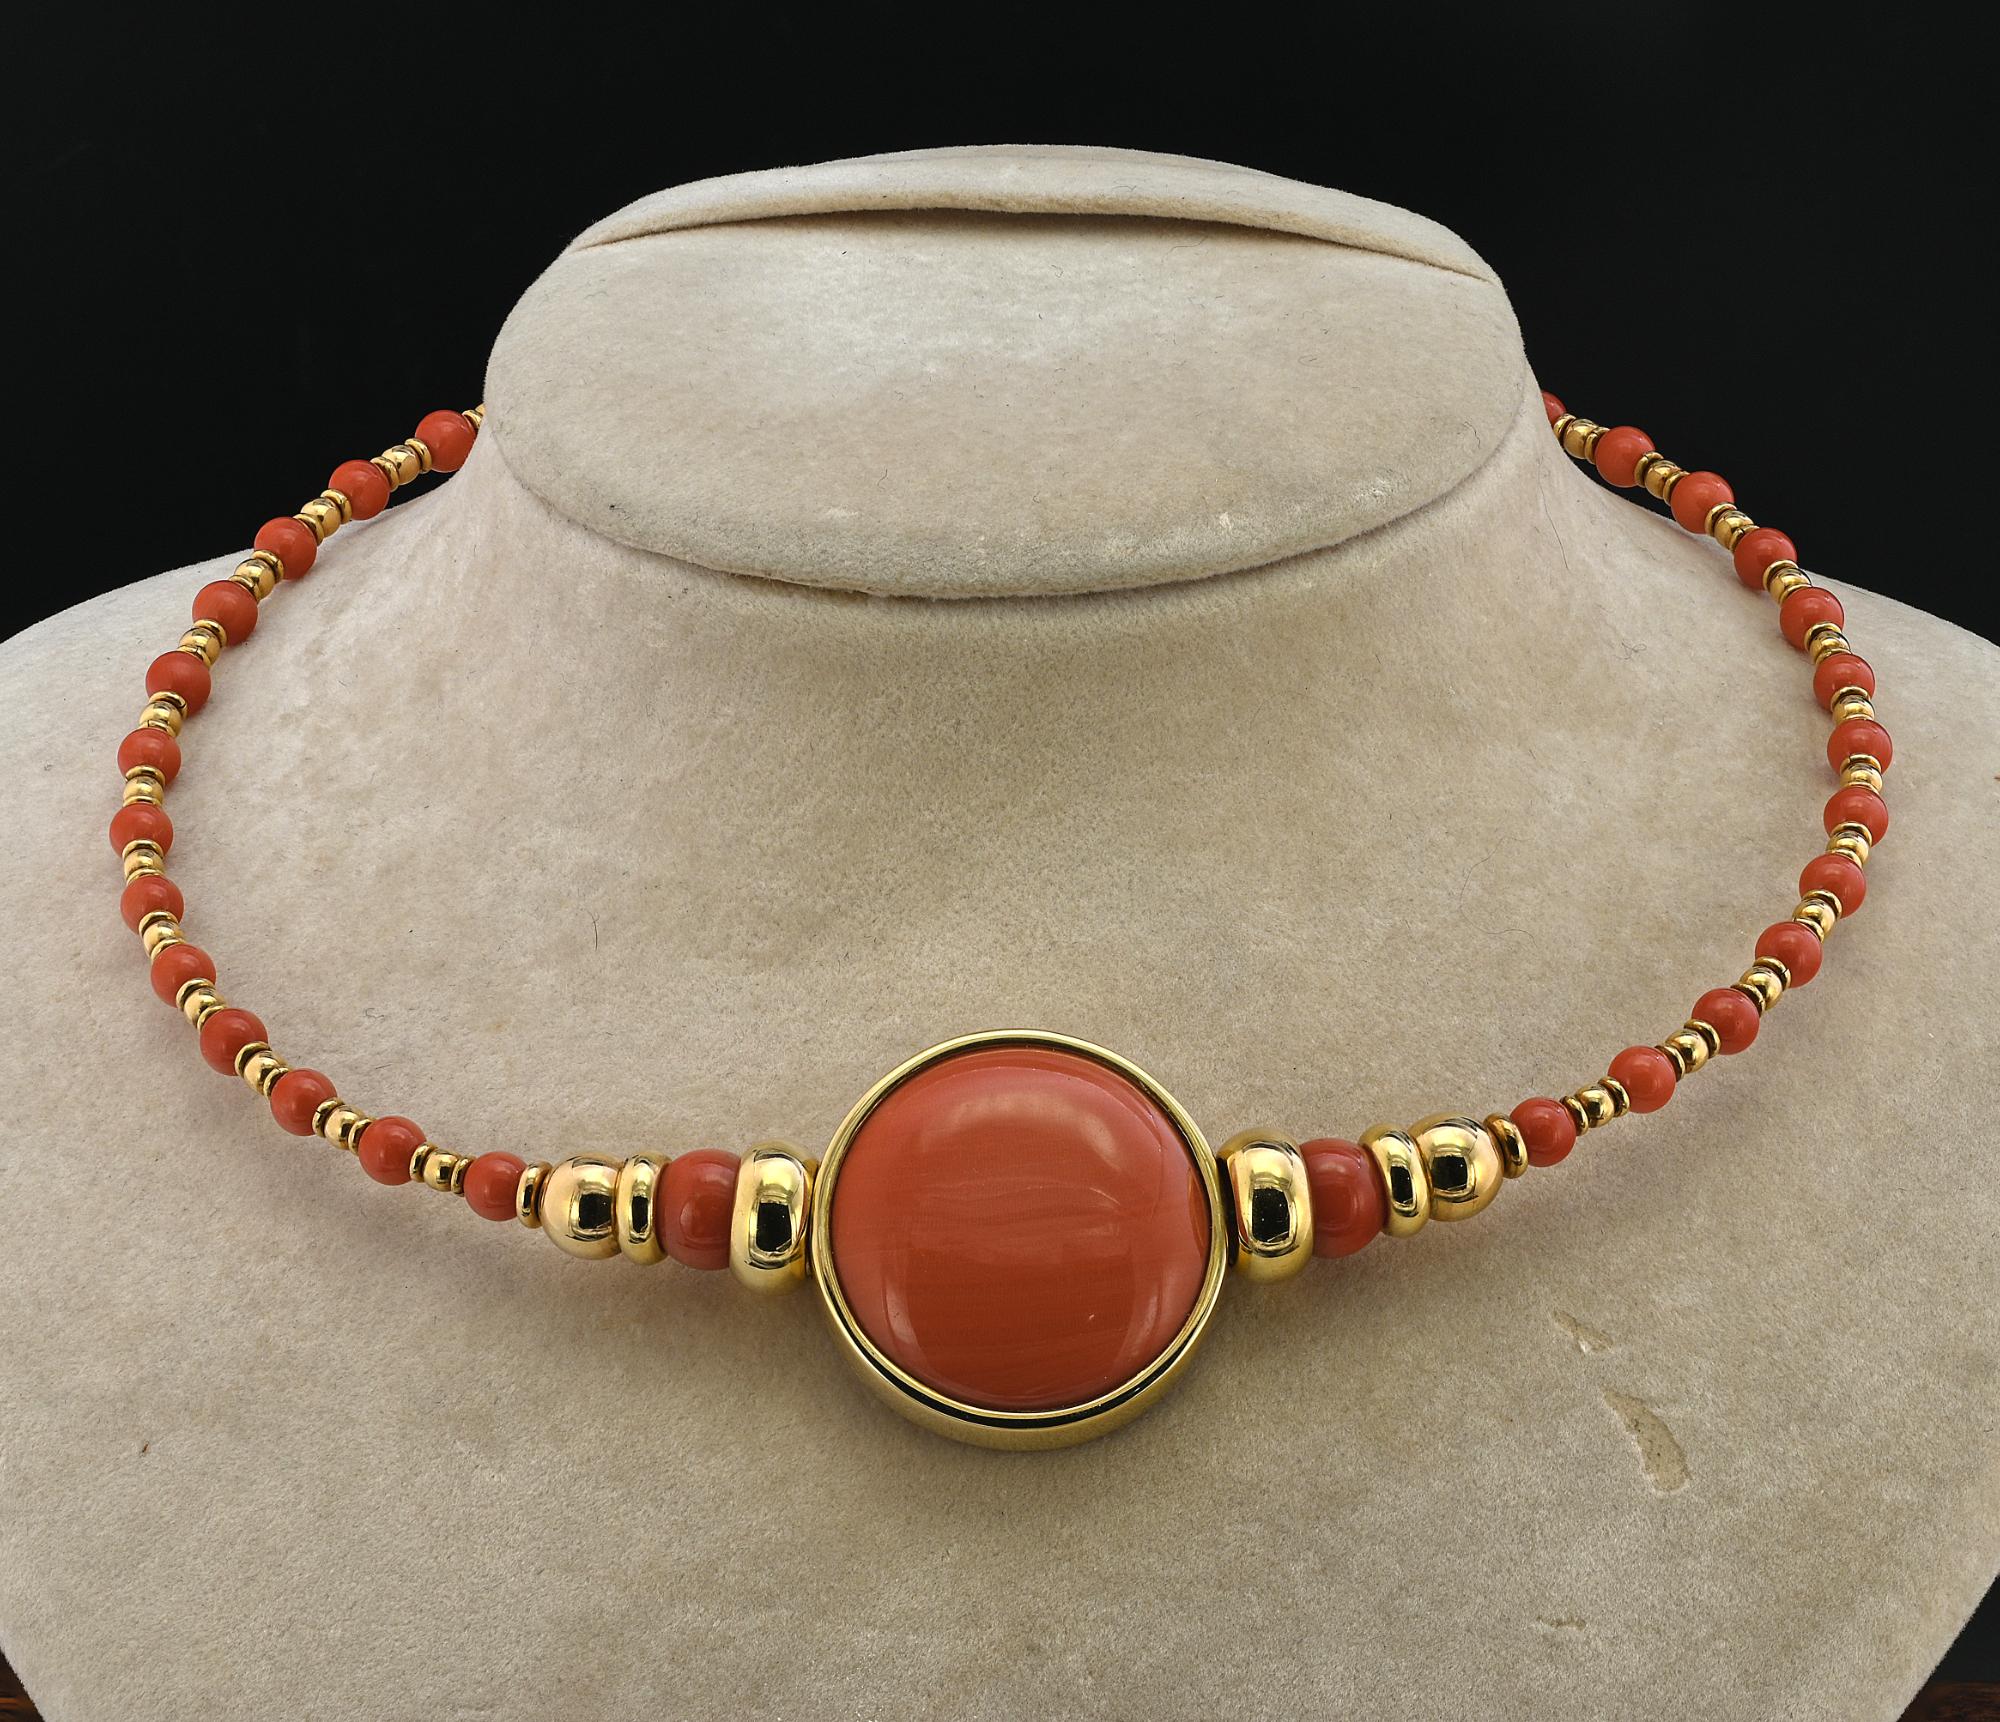 This marvelous 1980 circa Italian necklace is of chic design and beautifully made
A large centerpiece of 3 cm. including the gold frame made of the finest flawless quality natural Coral cabochon beautifully polished to perfection, fascinating color,